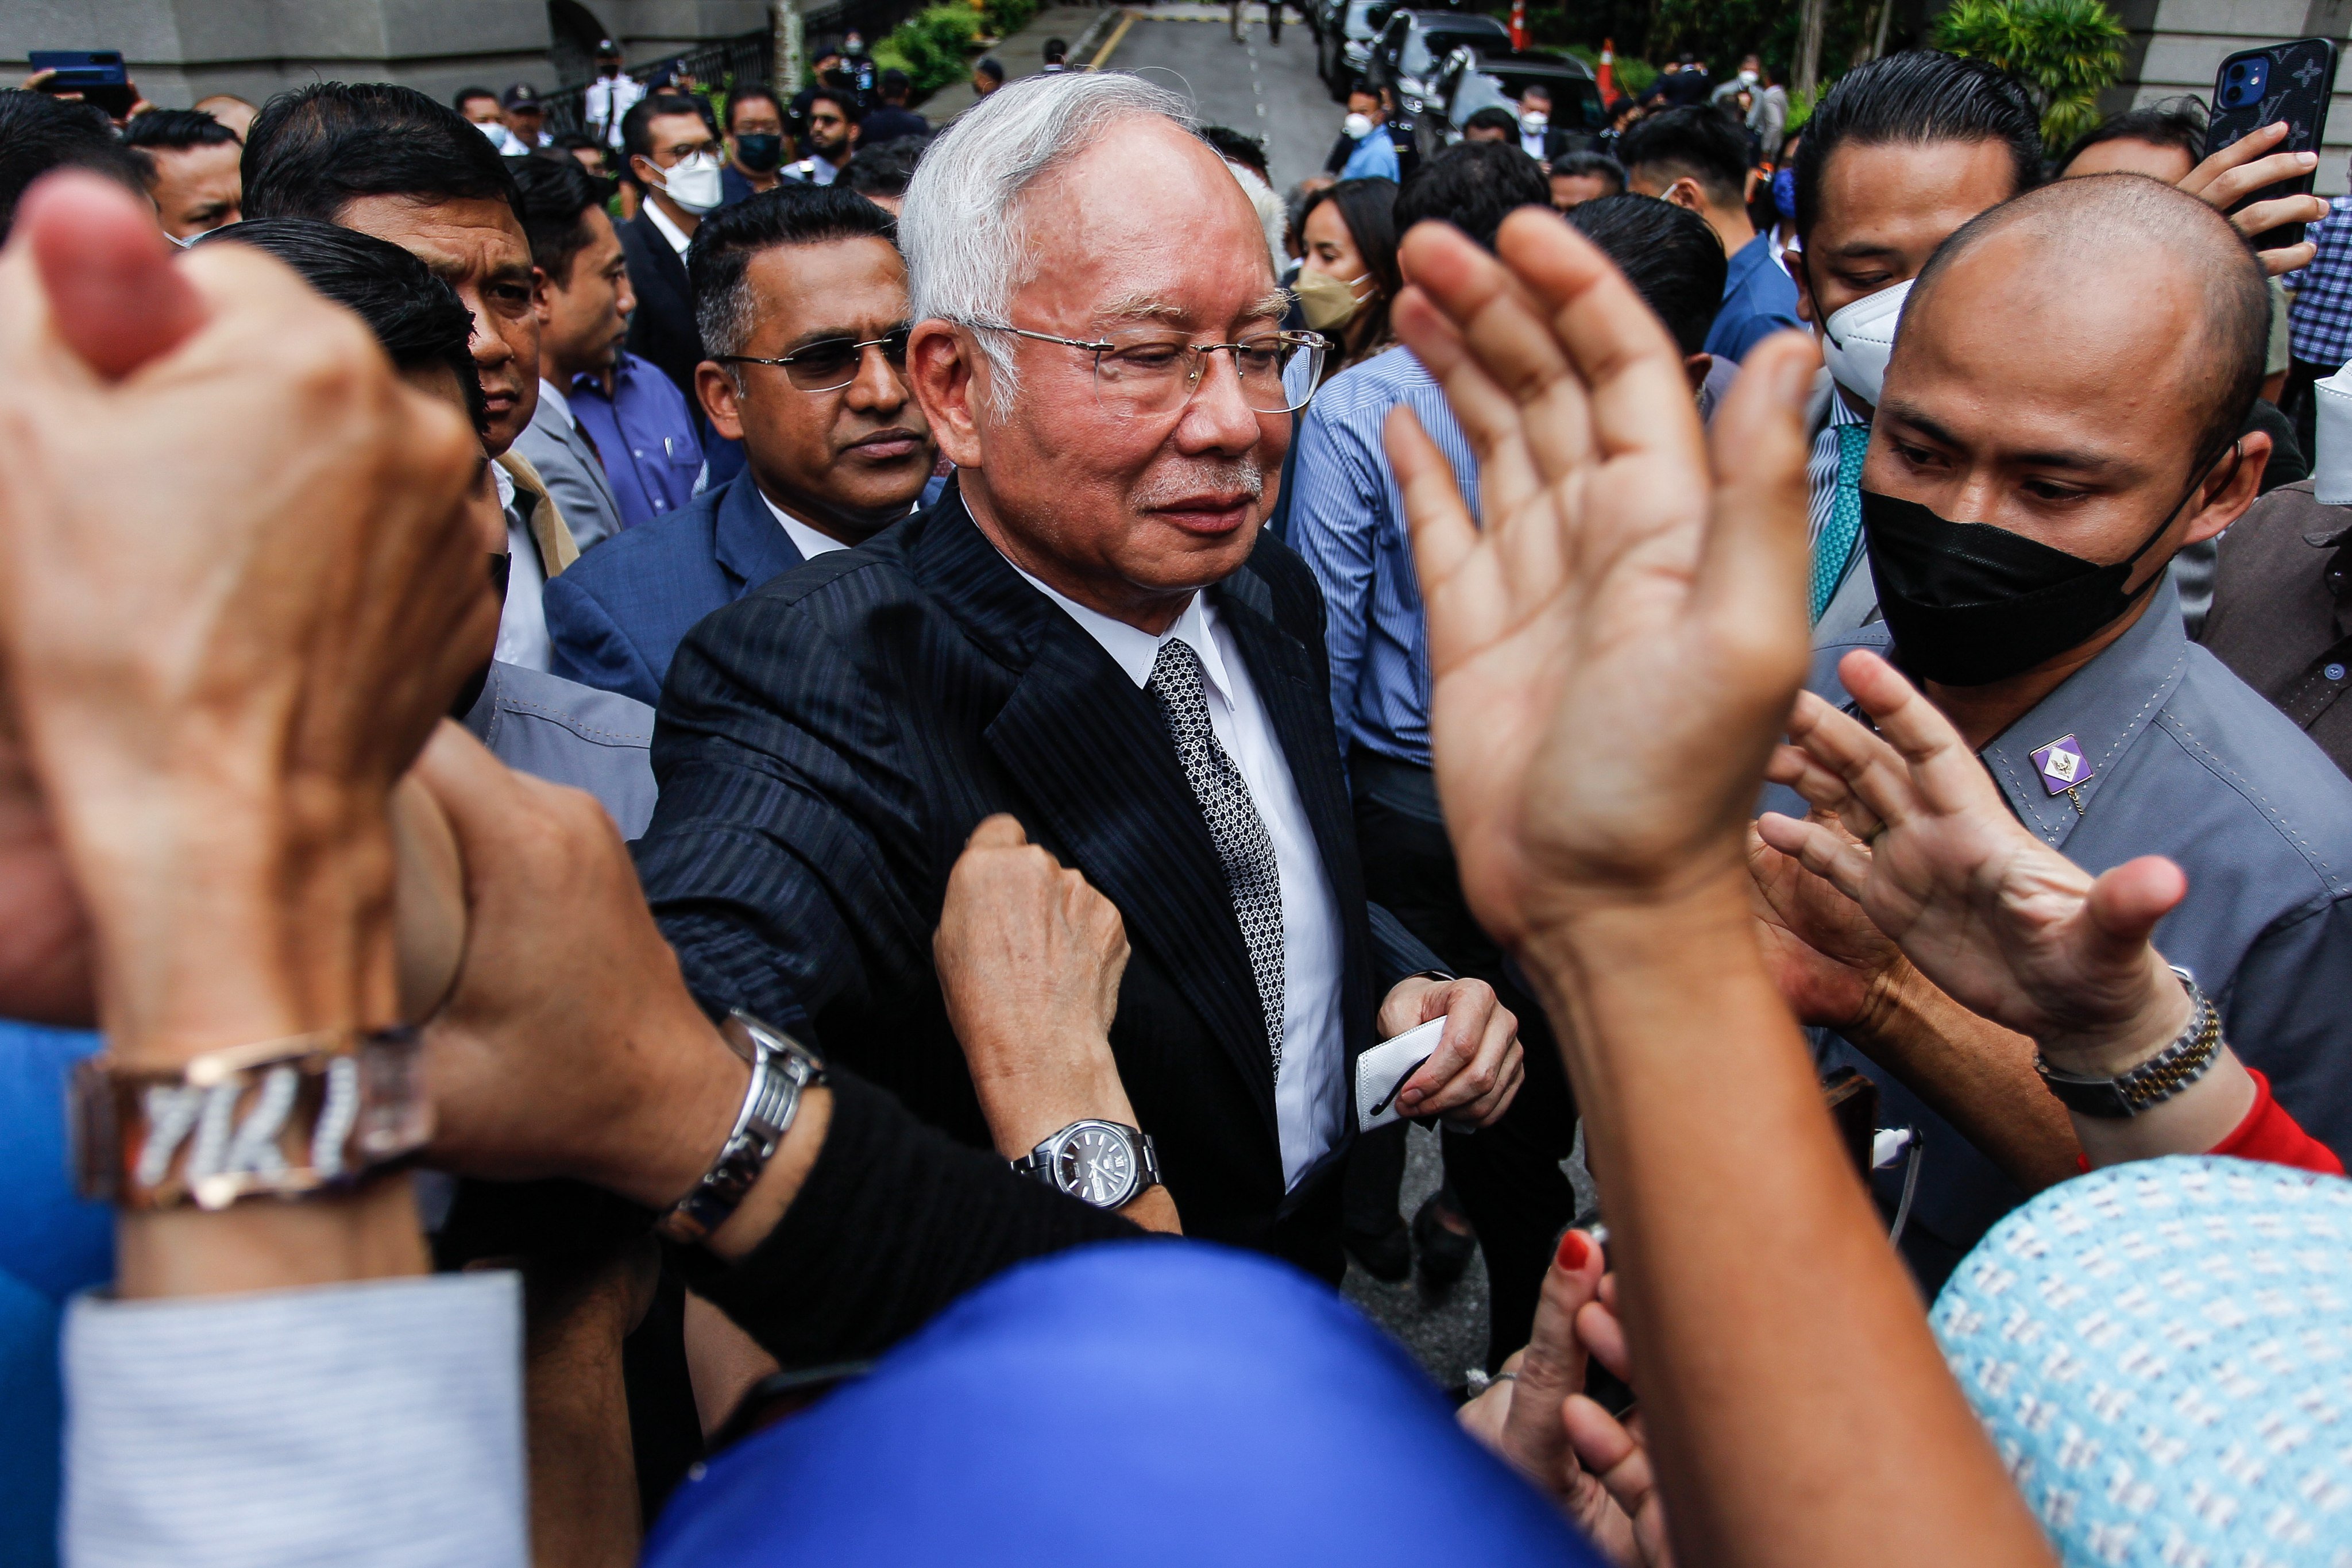 Former Malaysian prime minister Najib Razak pictured outside court in Putrajaya, Malaysia, last summer. He began a 12-year jail term for corruption linked to the 1MDB scandal in August last year. Photo: EPA-EFE